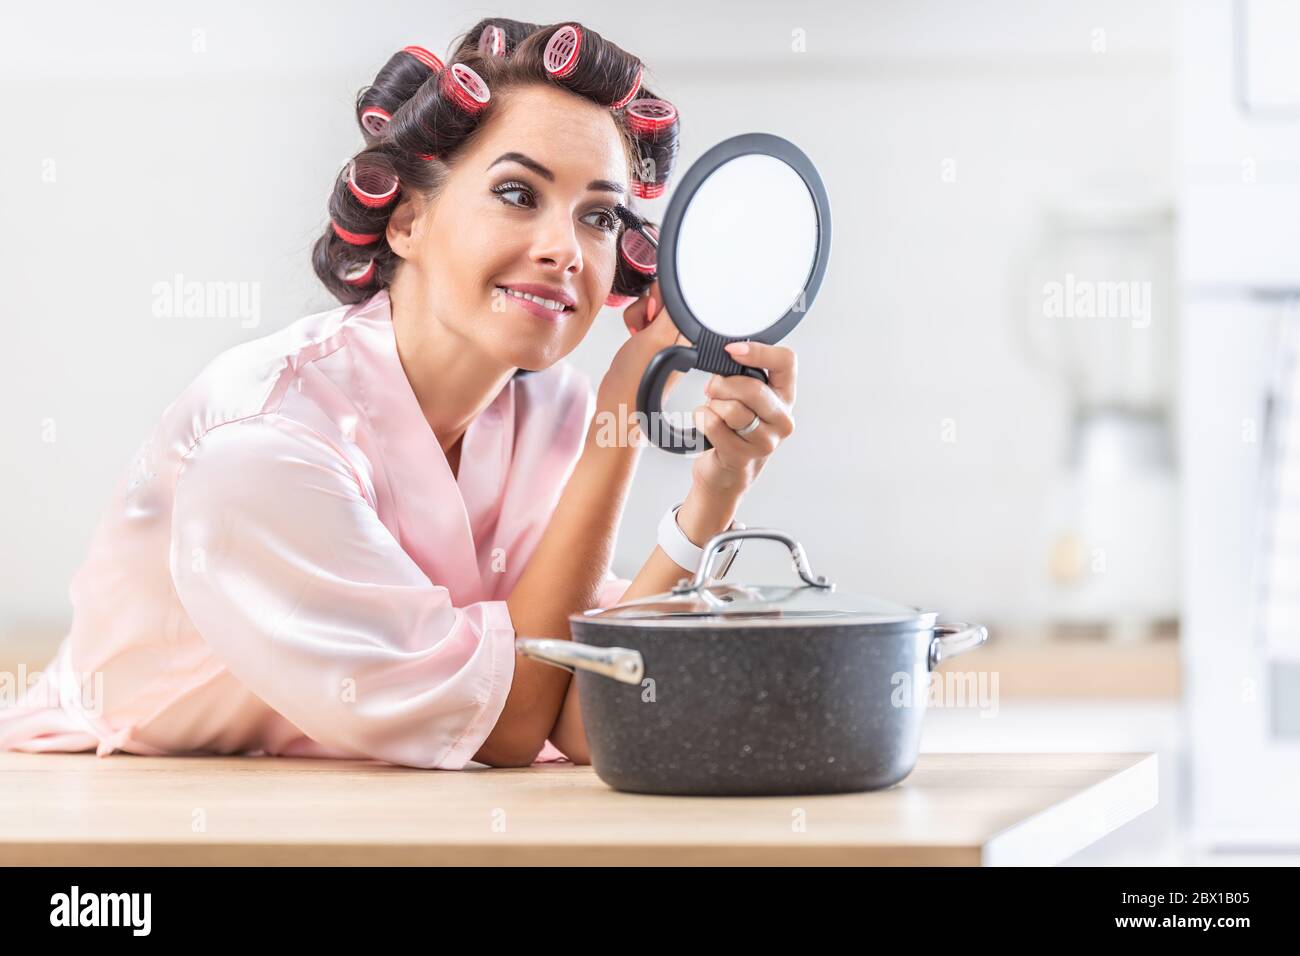 Can You Wear Makeup In A Kitchen?